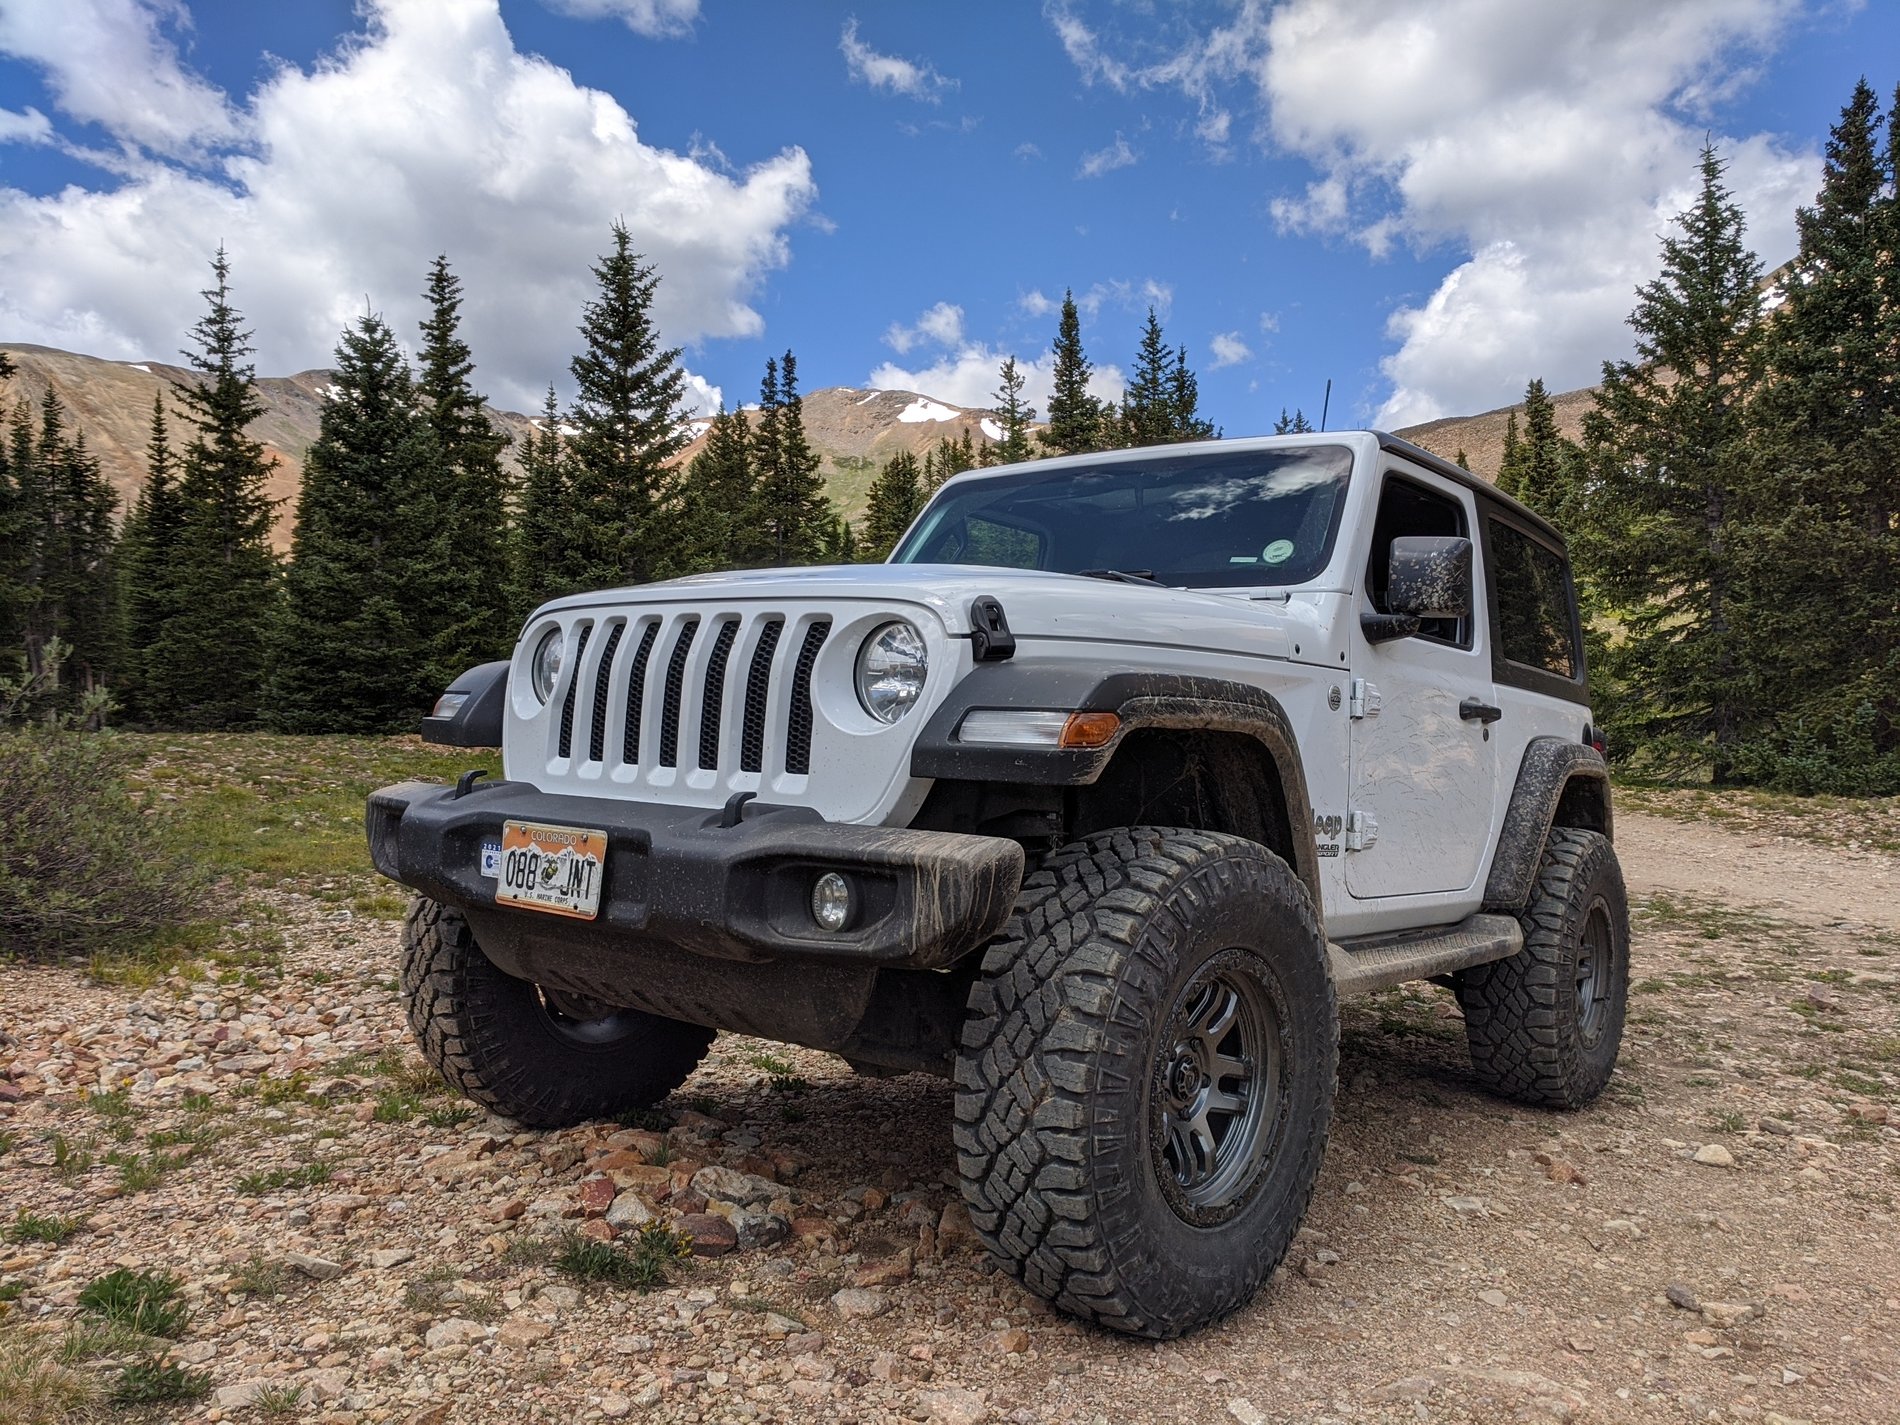 Jeep Wrangler JL Who actually takes their JL offroad? My'69offroadRide